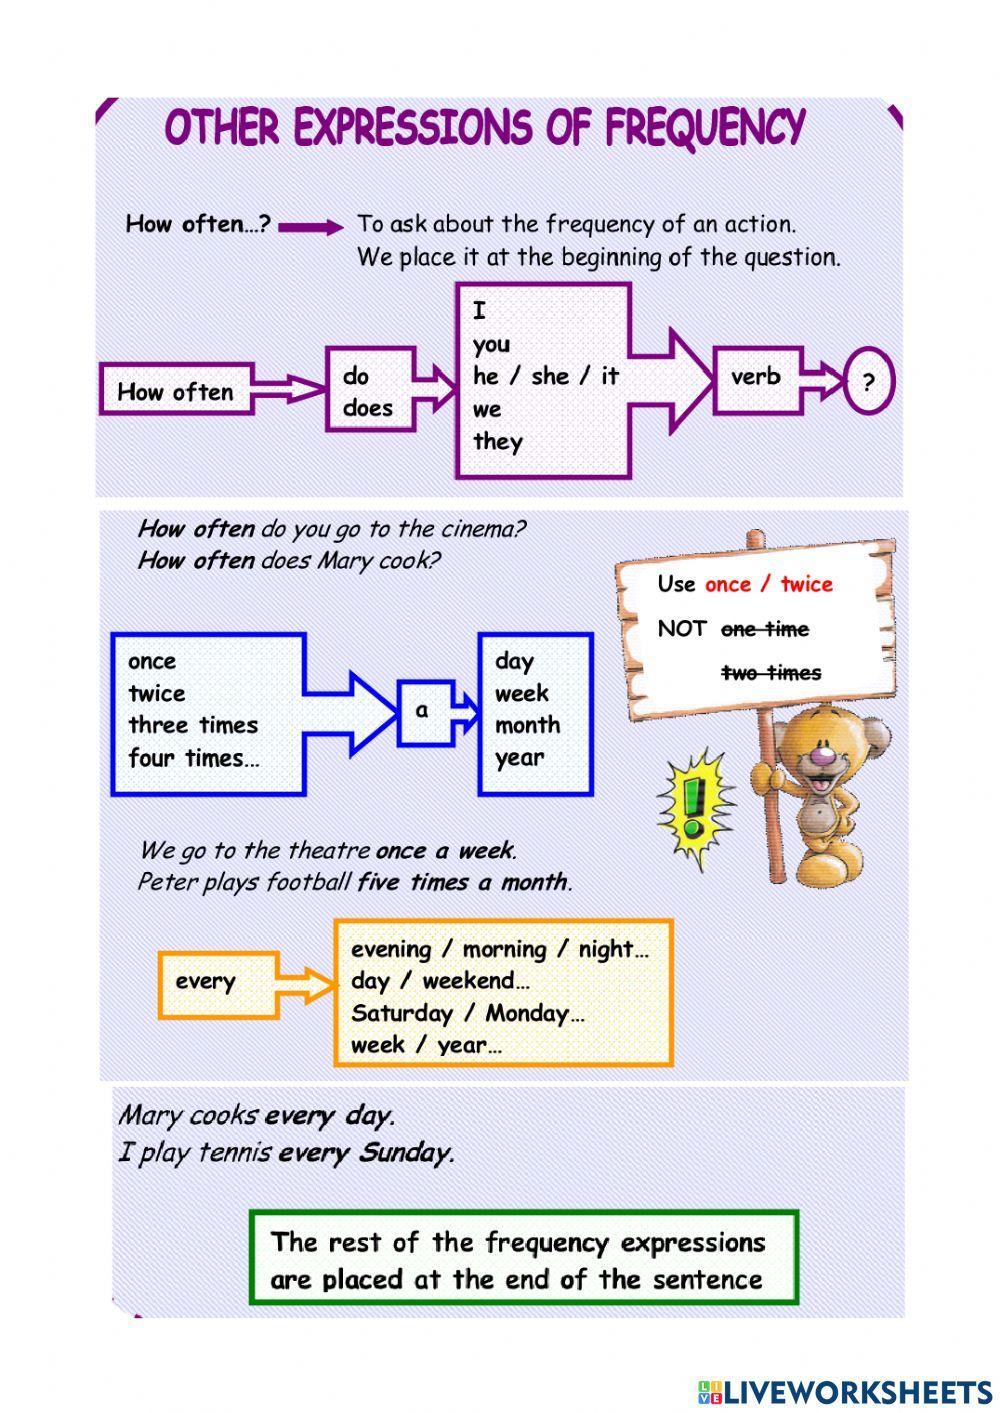 Adverbs of frequence